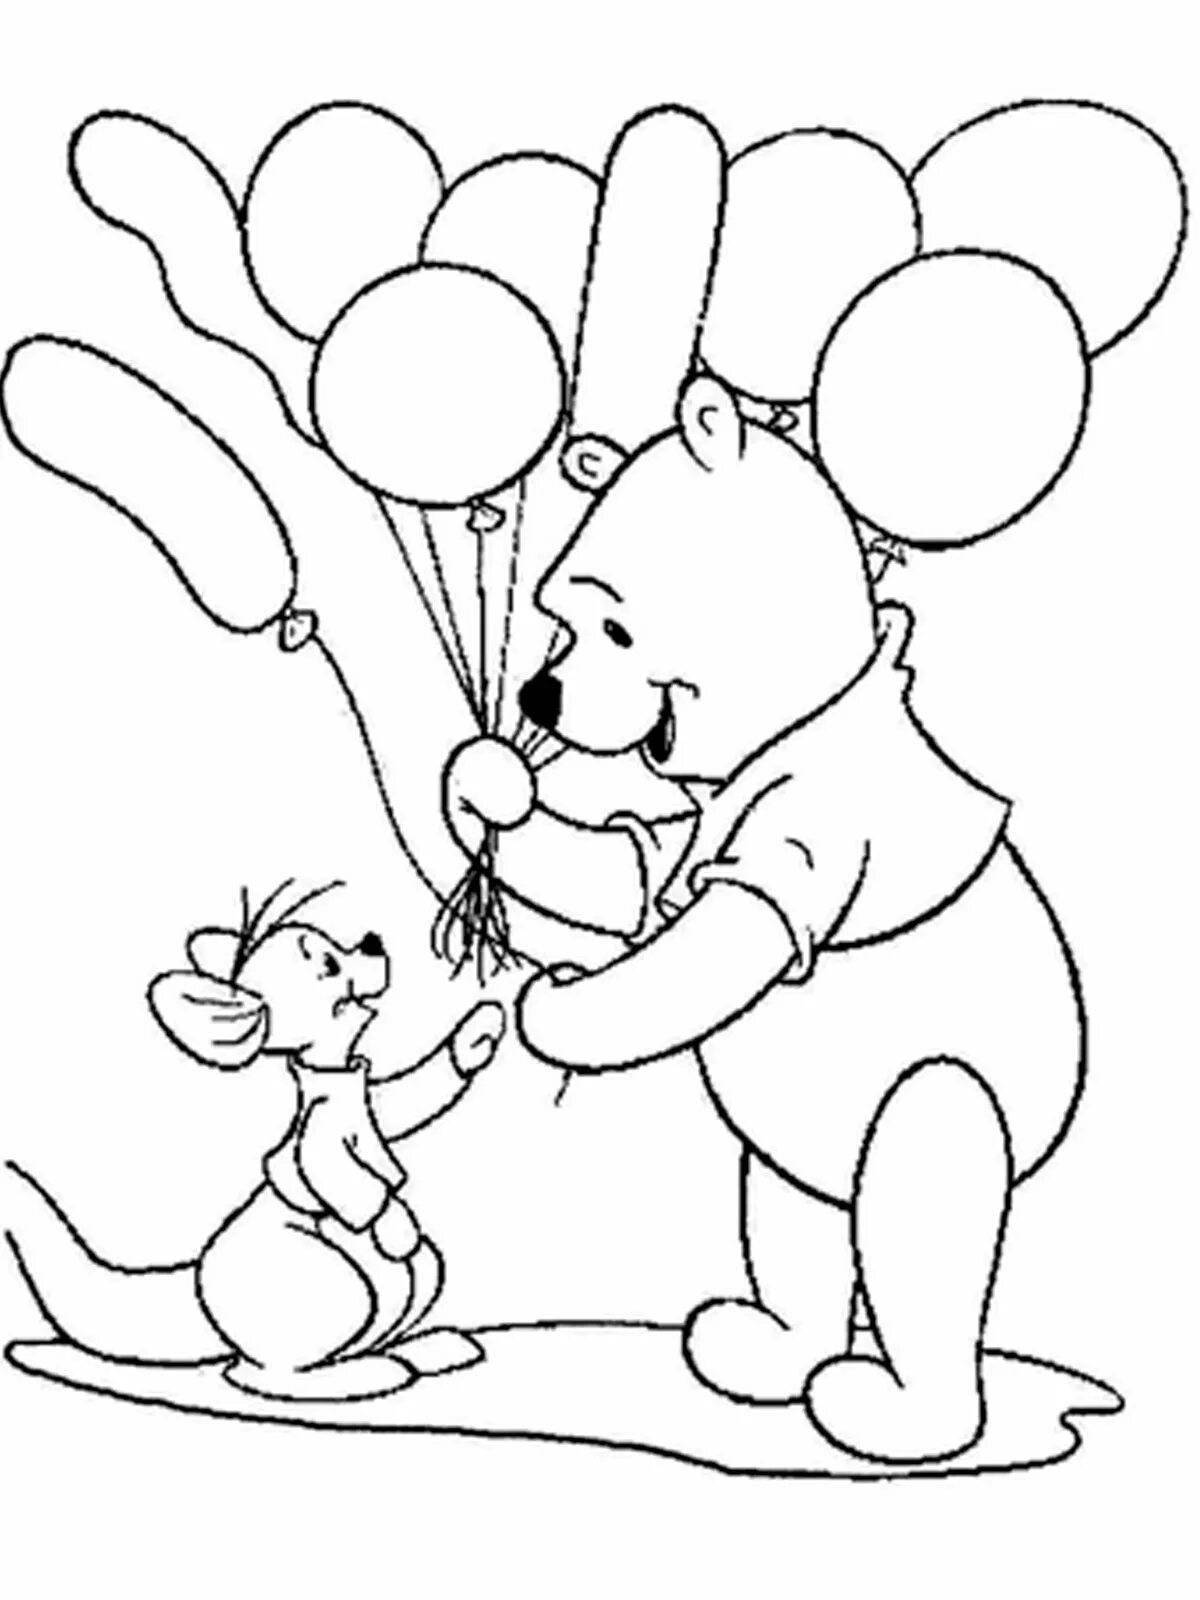 Winnie the pooh coloring book